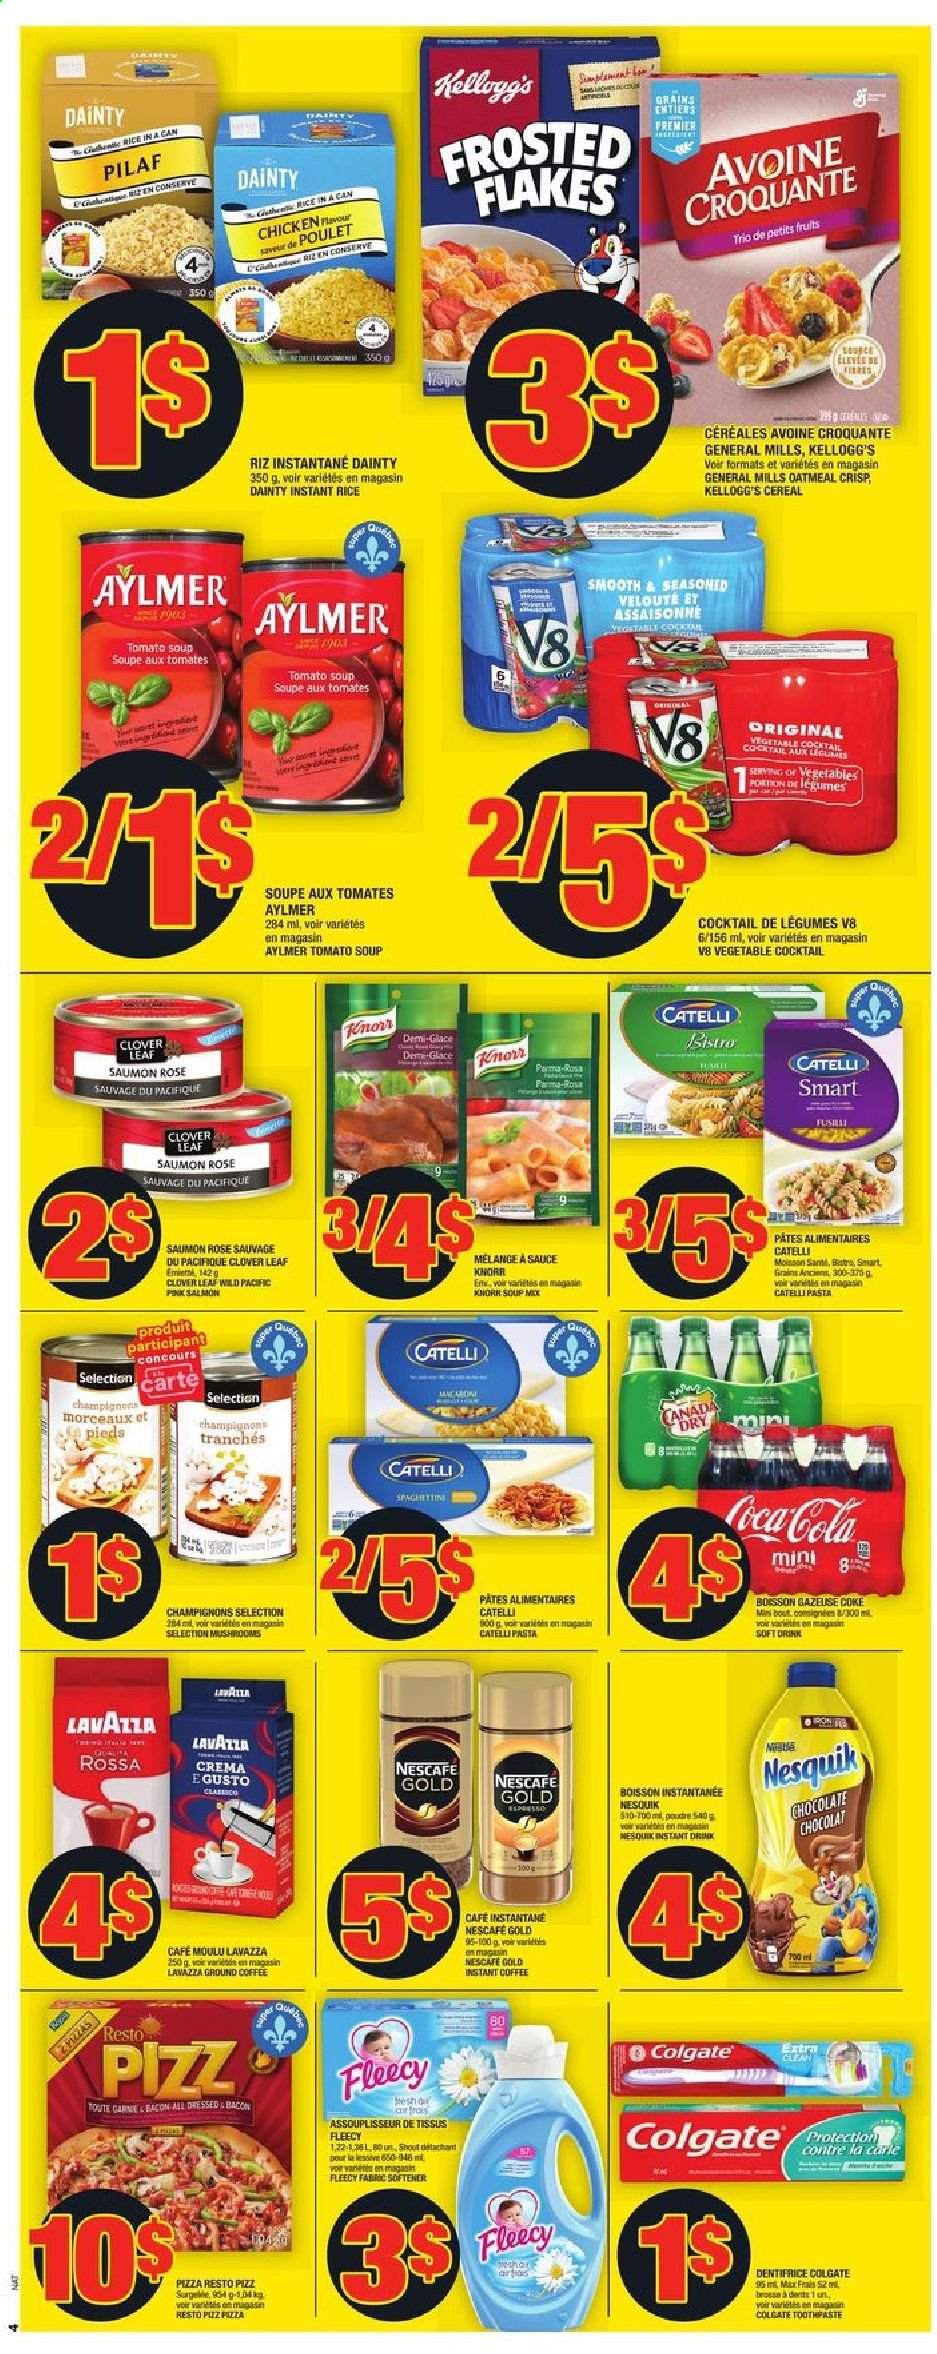 thumbnail - Super C Flyer - April 22, 2021 - April 28, 2021 - Sales products - salmon, tomato soup, pizza, soup mix, soup, pasta, sauce, bacon, Clover, chocolate, Kellogg's, oatmeal, cereals, Frosted Flakes, rice, Canada Dry, Coca-Cola, soft drink, instant coffee, ground coffee, Lavazza, rosé wine, Ron Pelicano, fabric softener, toothpaste, Knorr, Nesquik, Nescafé. Page 6.